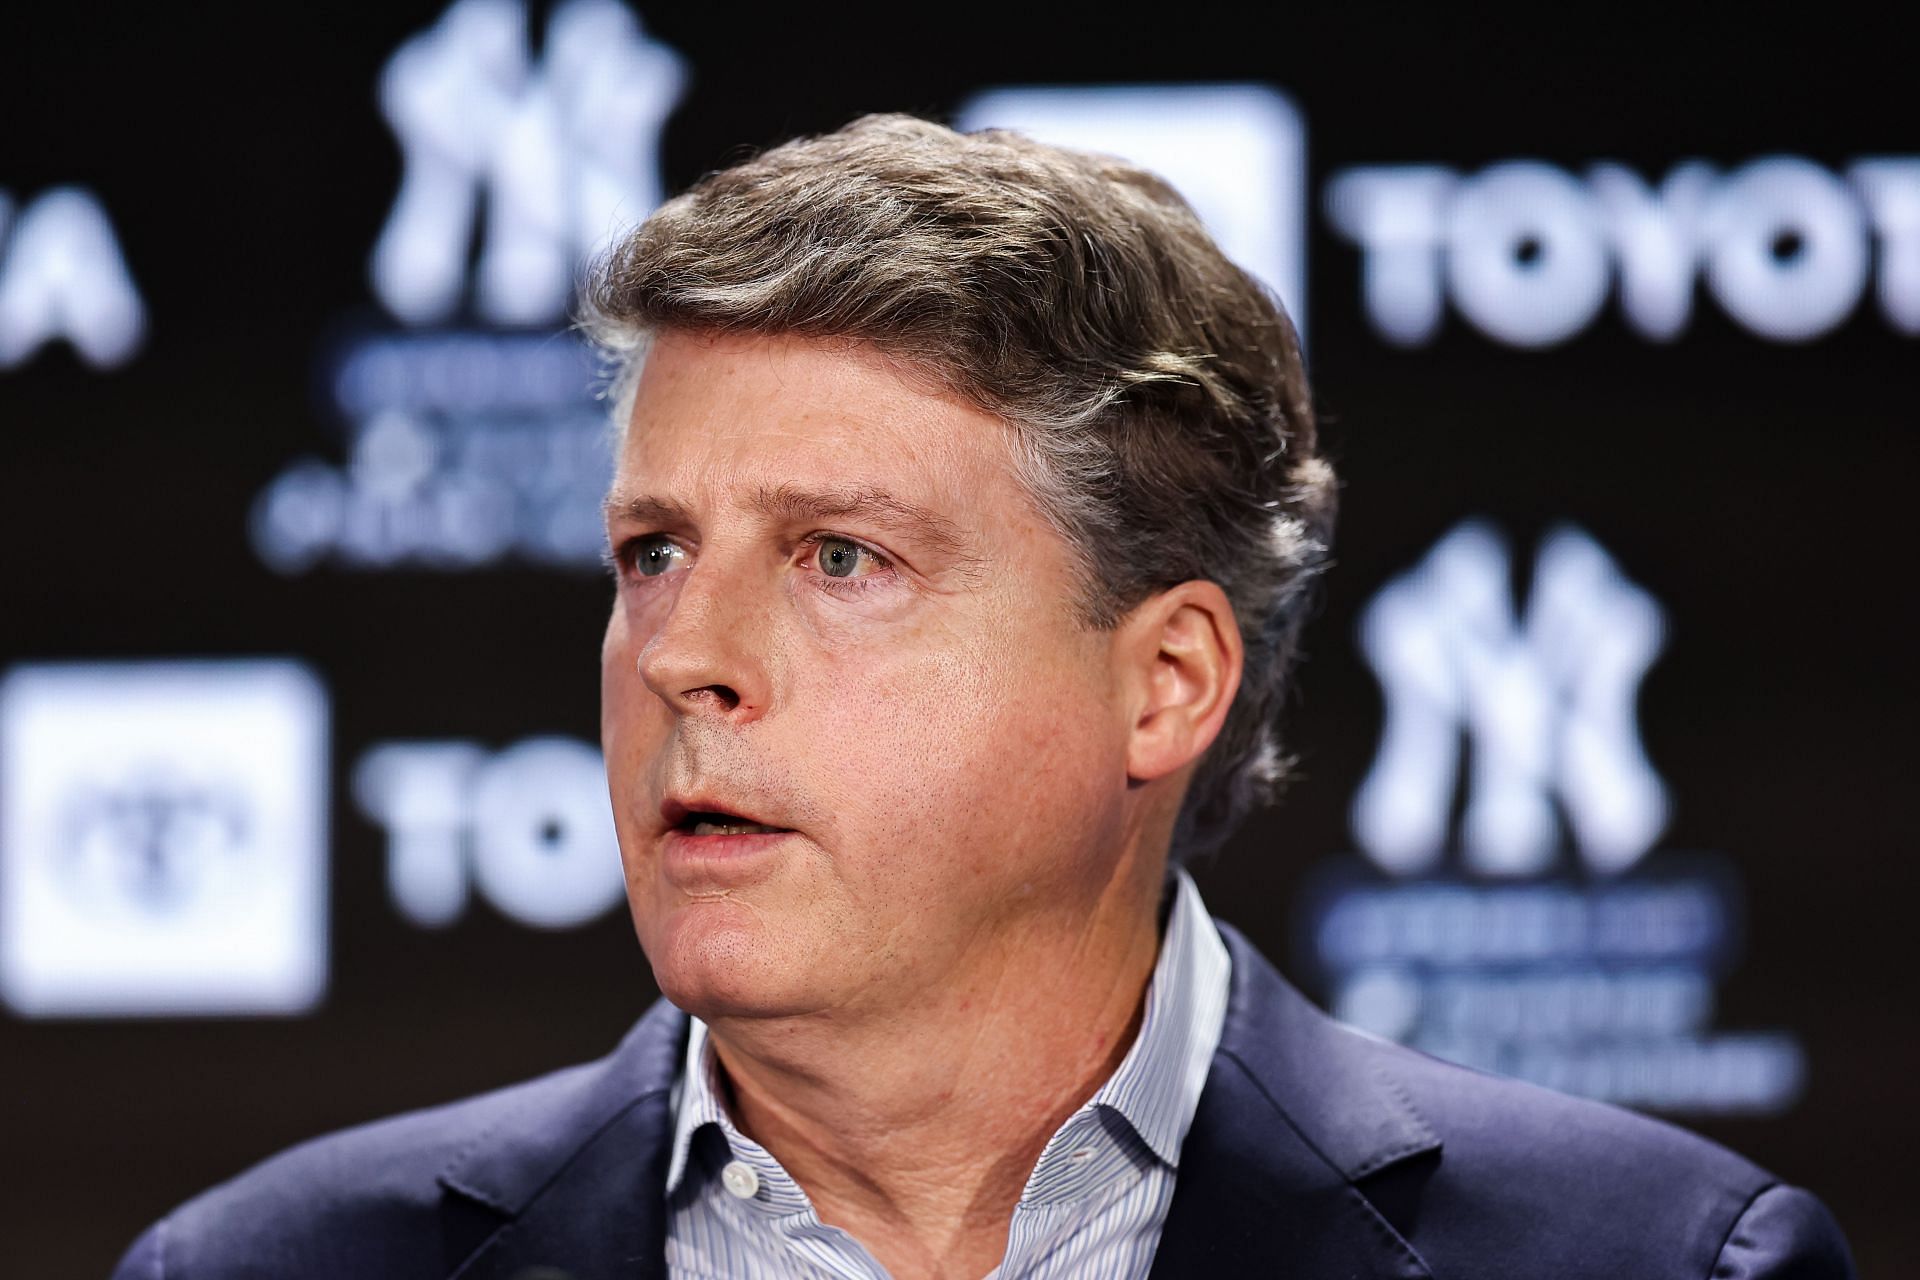 Yankees Owner Hal Steinbrenner Realizes it May Take Record Price